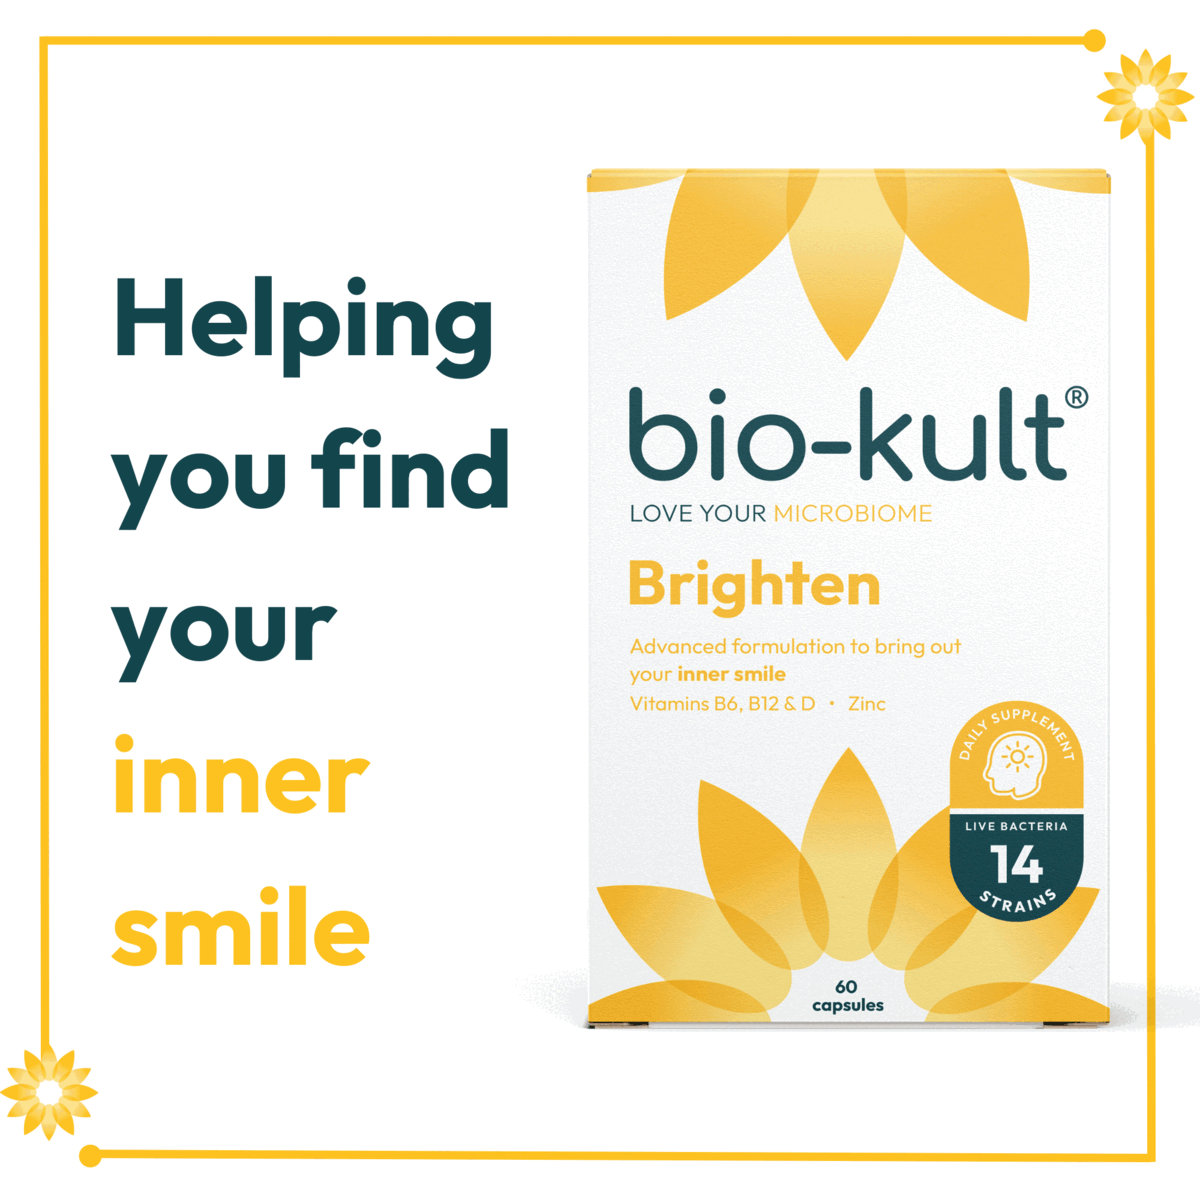 Helping you find your inner smile, the little flower with a whole lot of power, new look some award winning bacteria inside!higly recommended - life saver, fantastic - i just can't believe it, great product, we can't hold in our exictment!